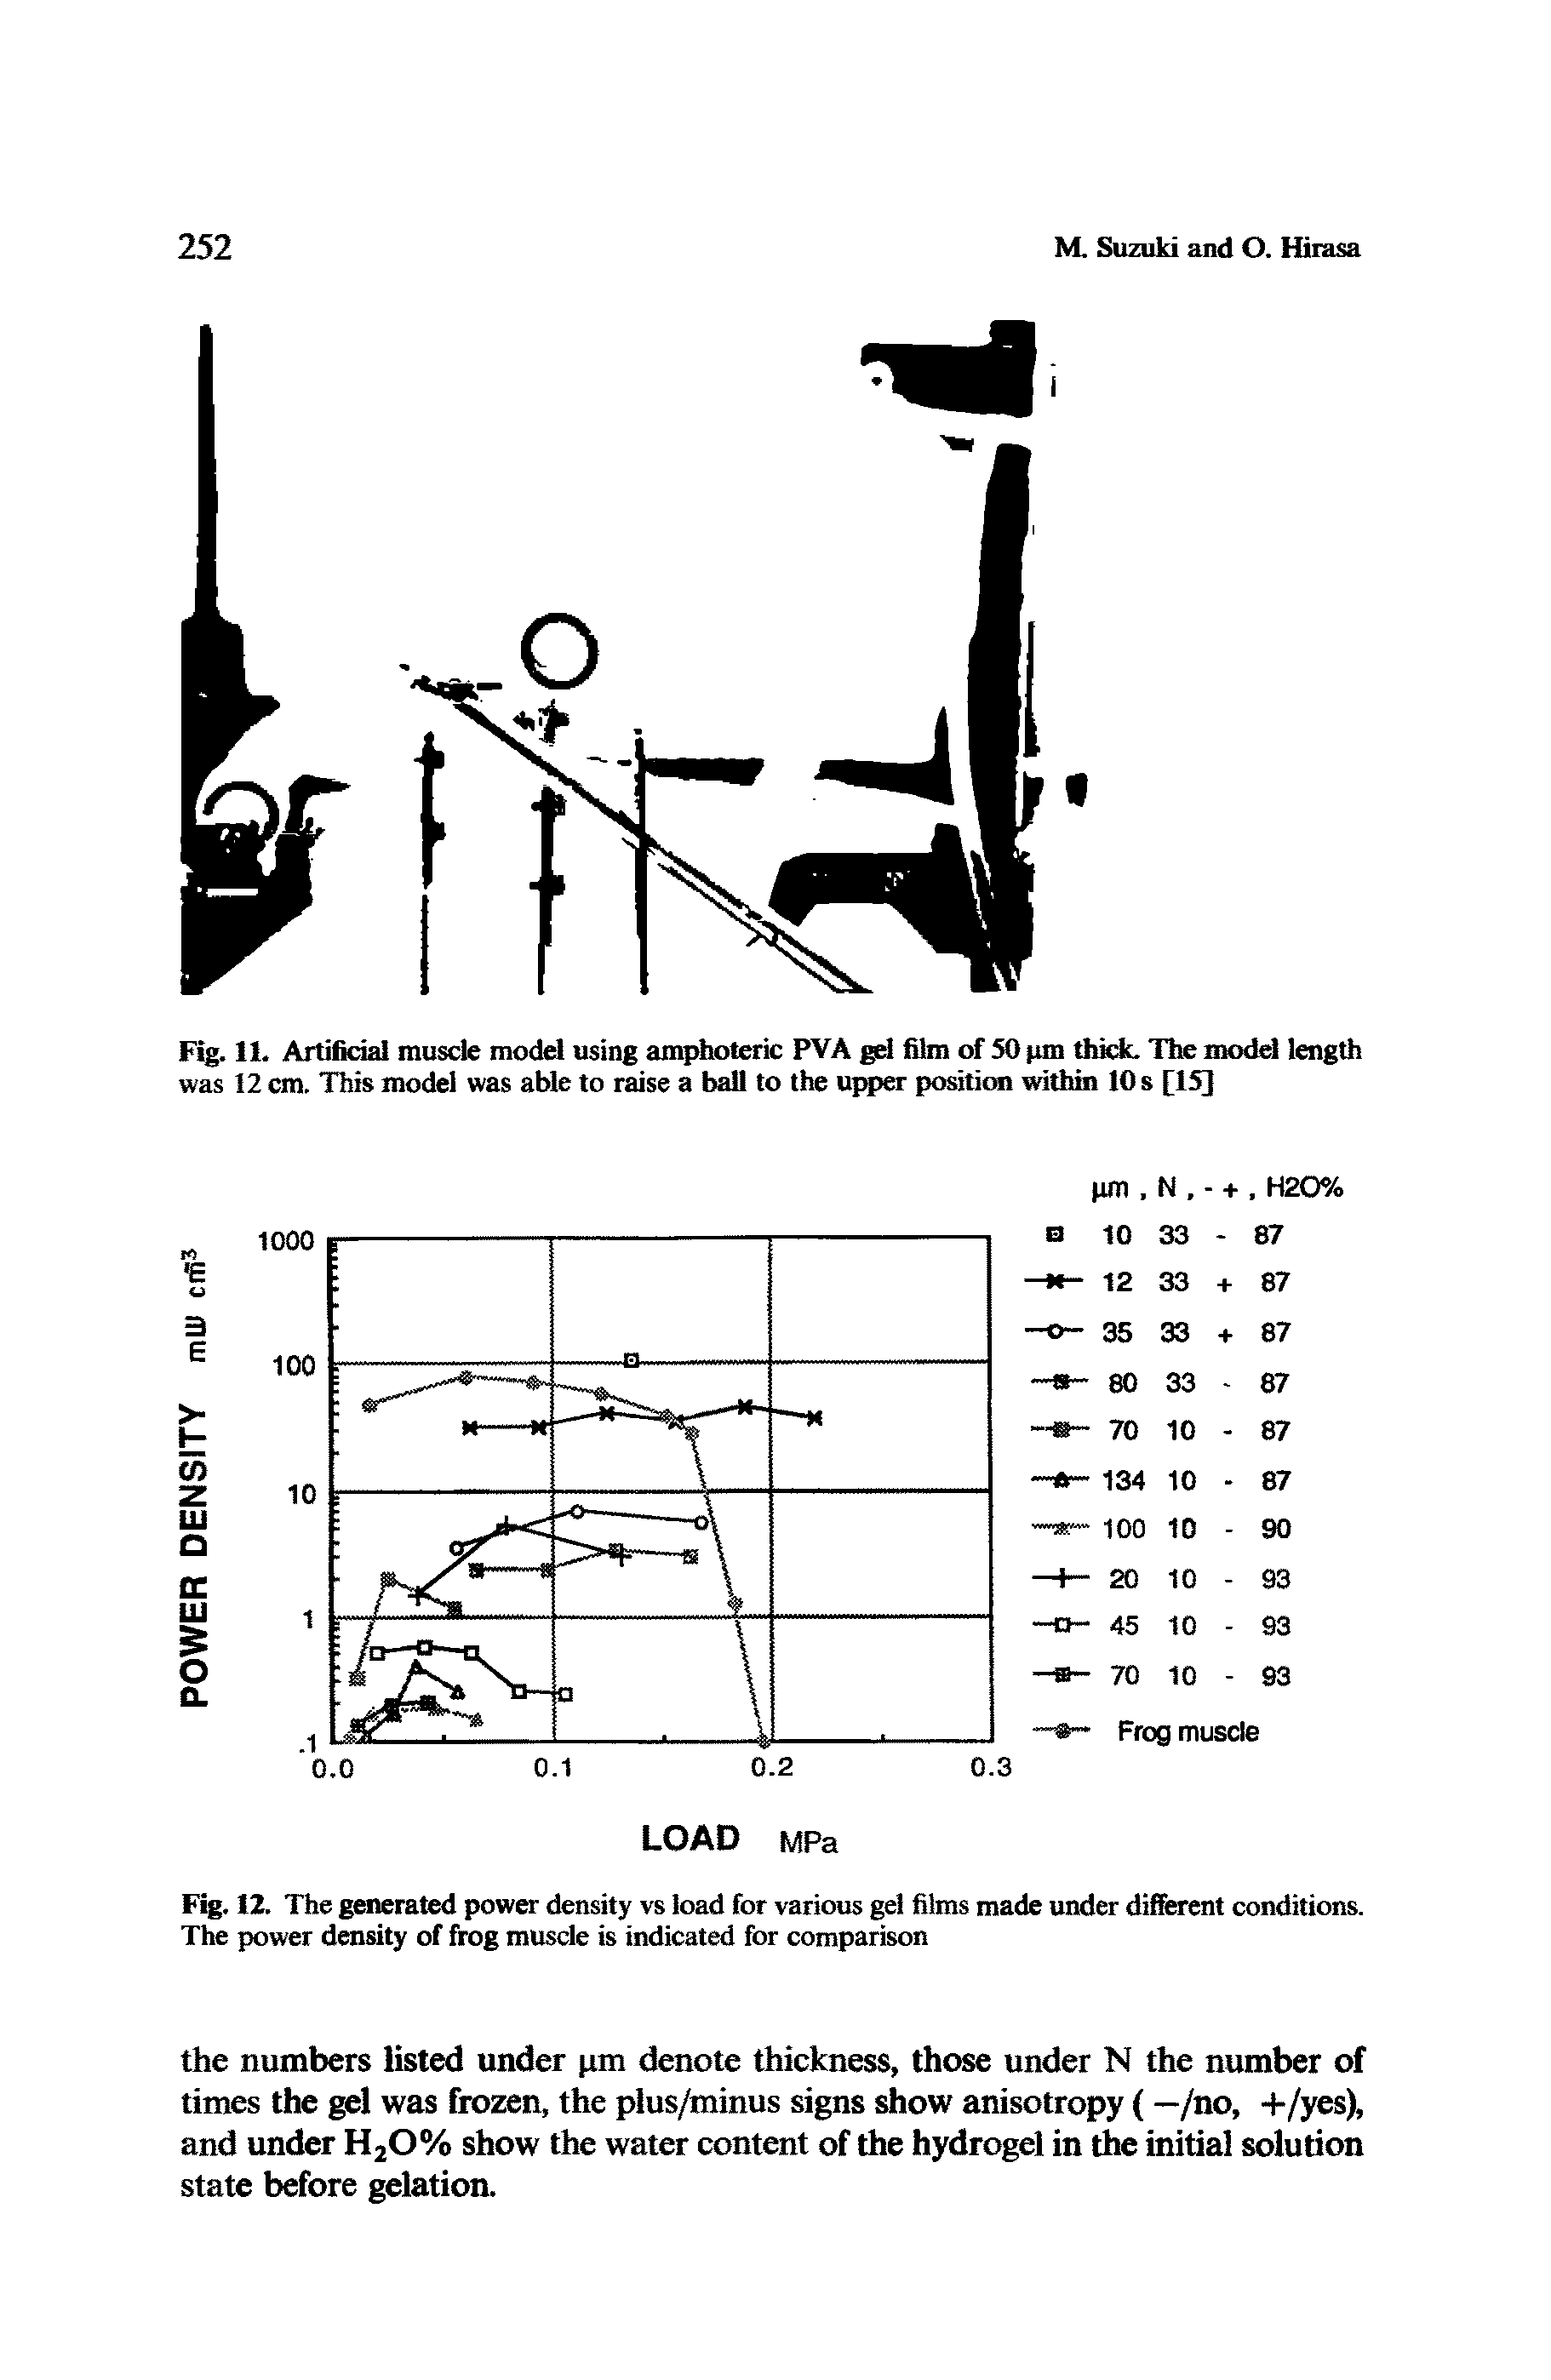 Fig. 11. Artificial muscle model using amphoteric PVA gel film of SO pm thick. The model length was 12 cm. This model was able to raise a ball to the upper position within 10 s [15]...